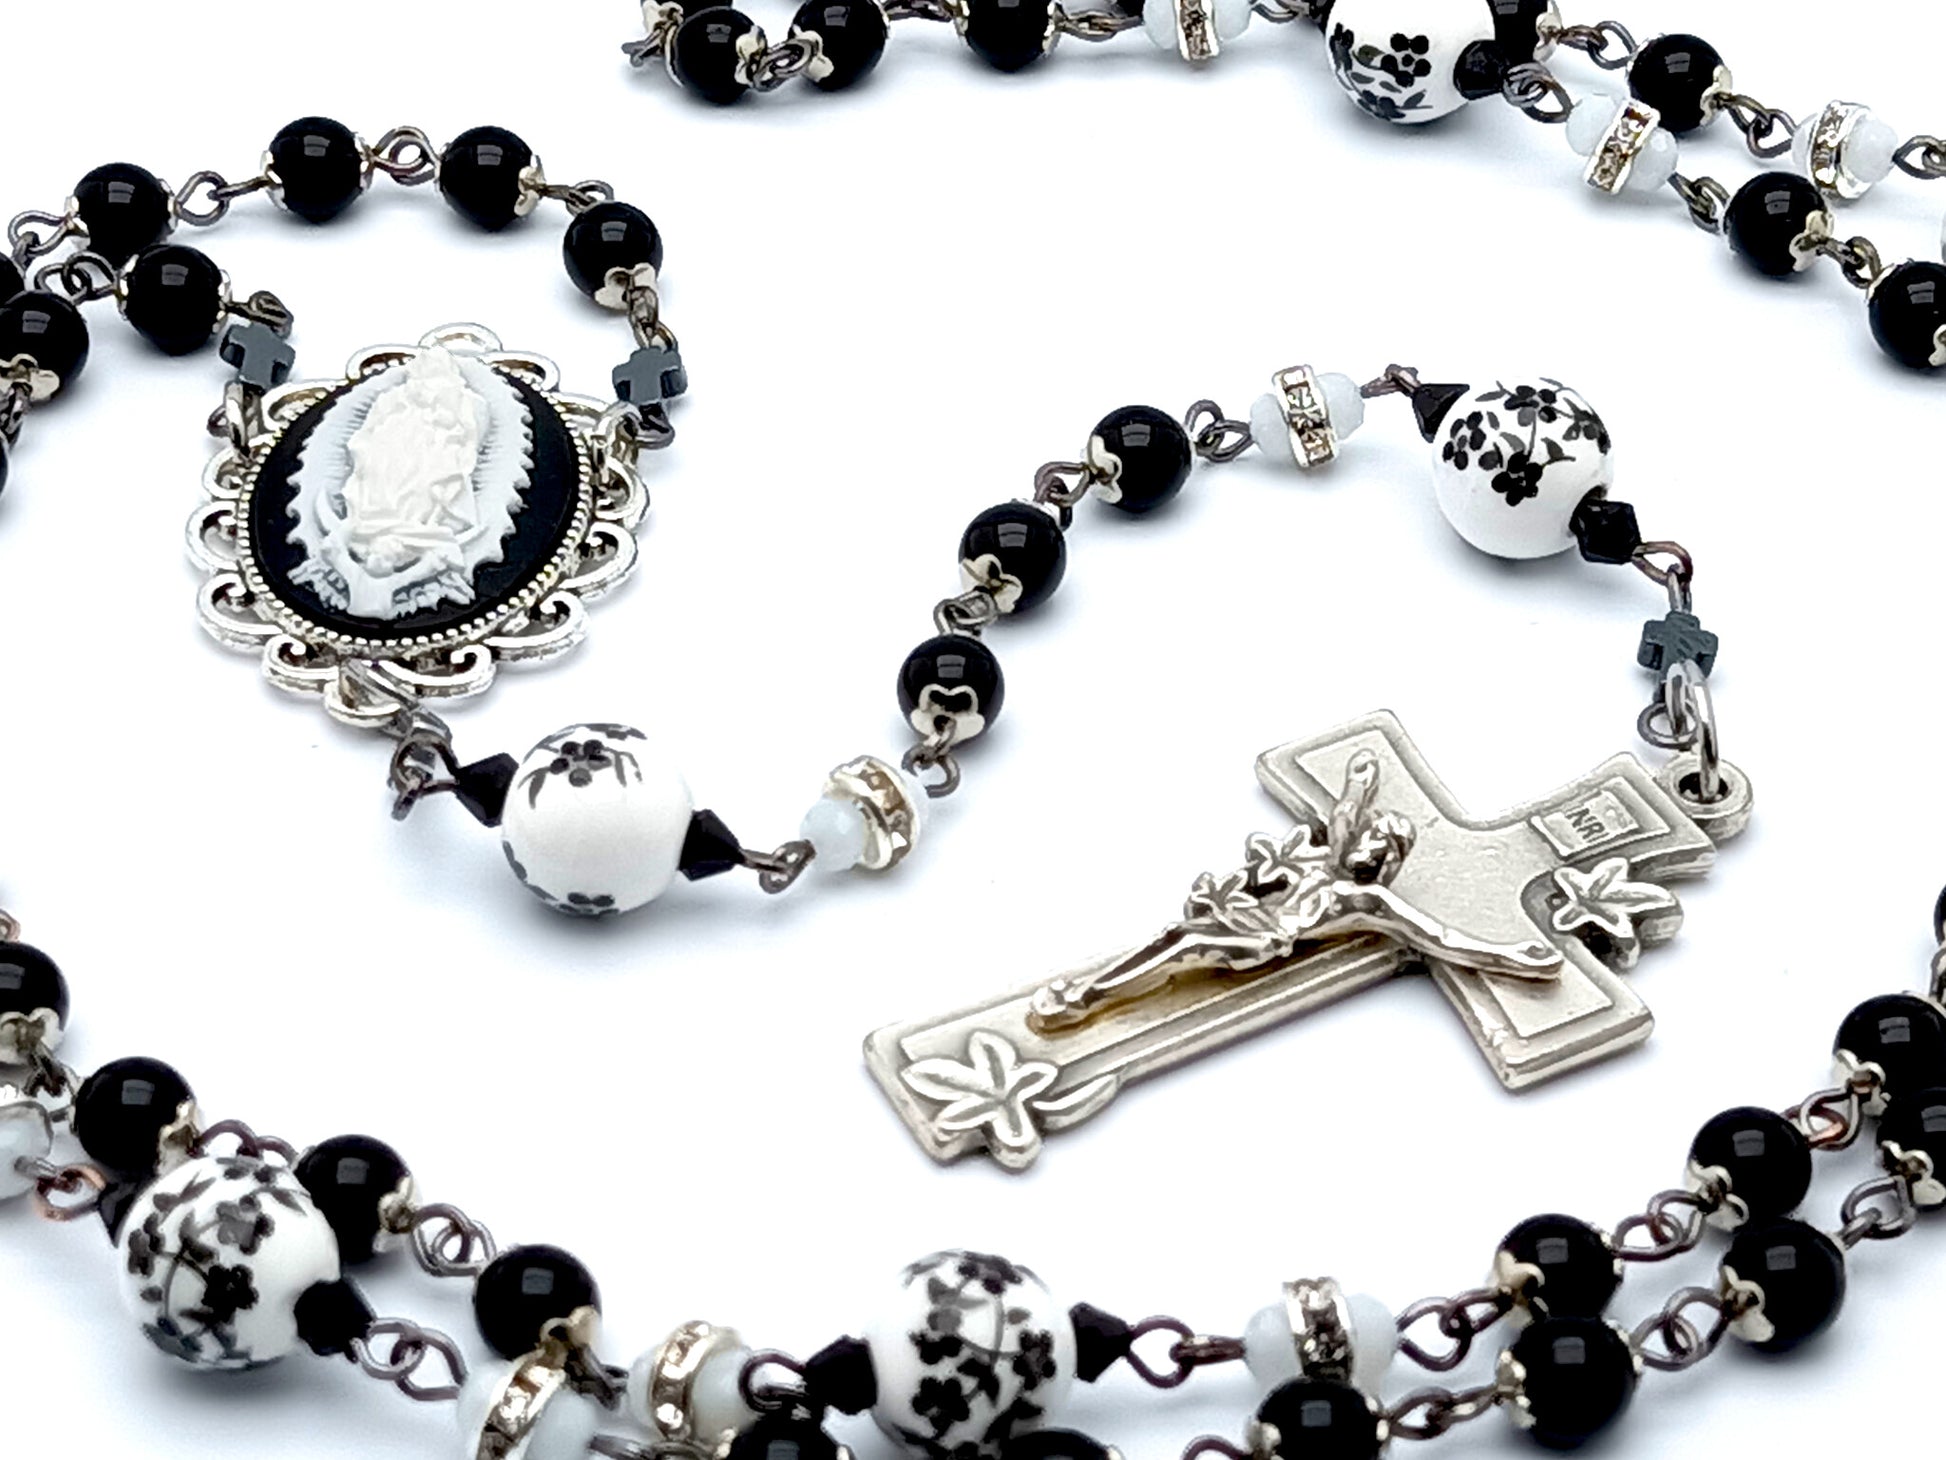 Our Lady of Guadalupe cameo unique rosary beads with onyx gemstone and porcelain beads and lily crucifix.